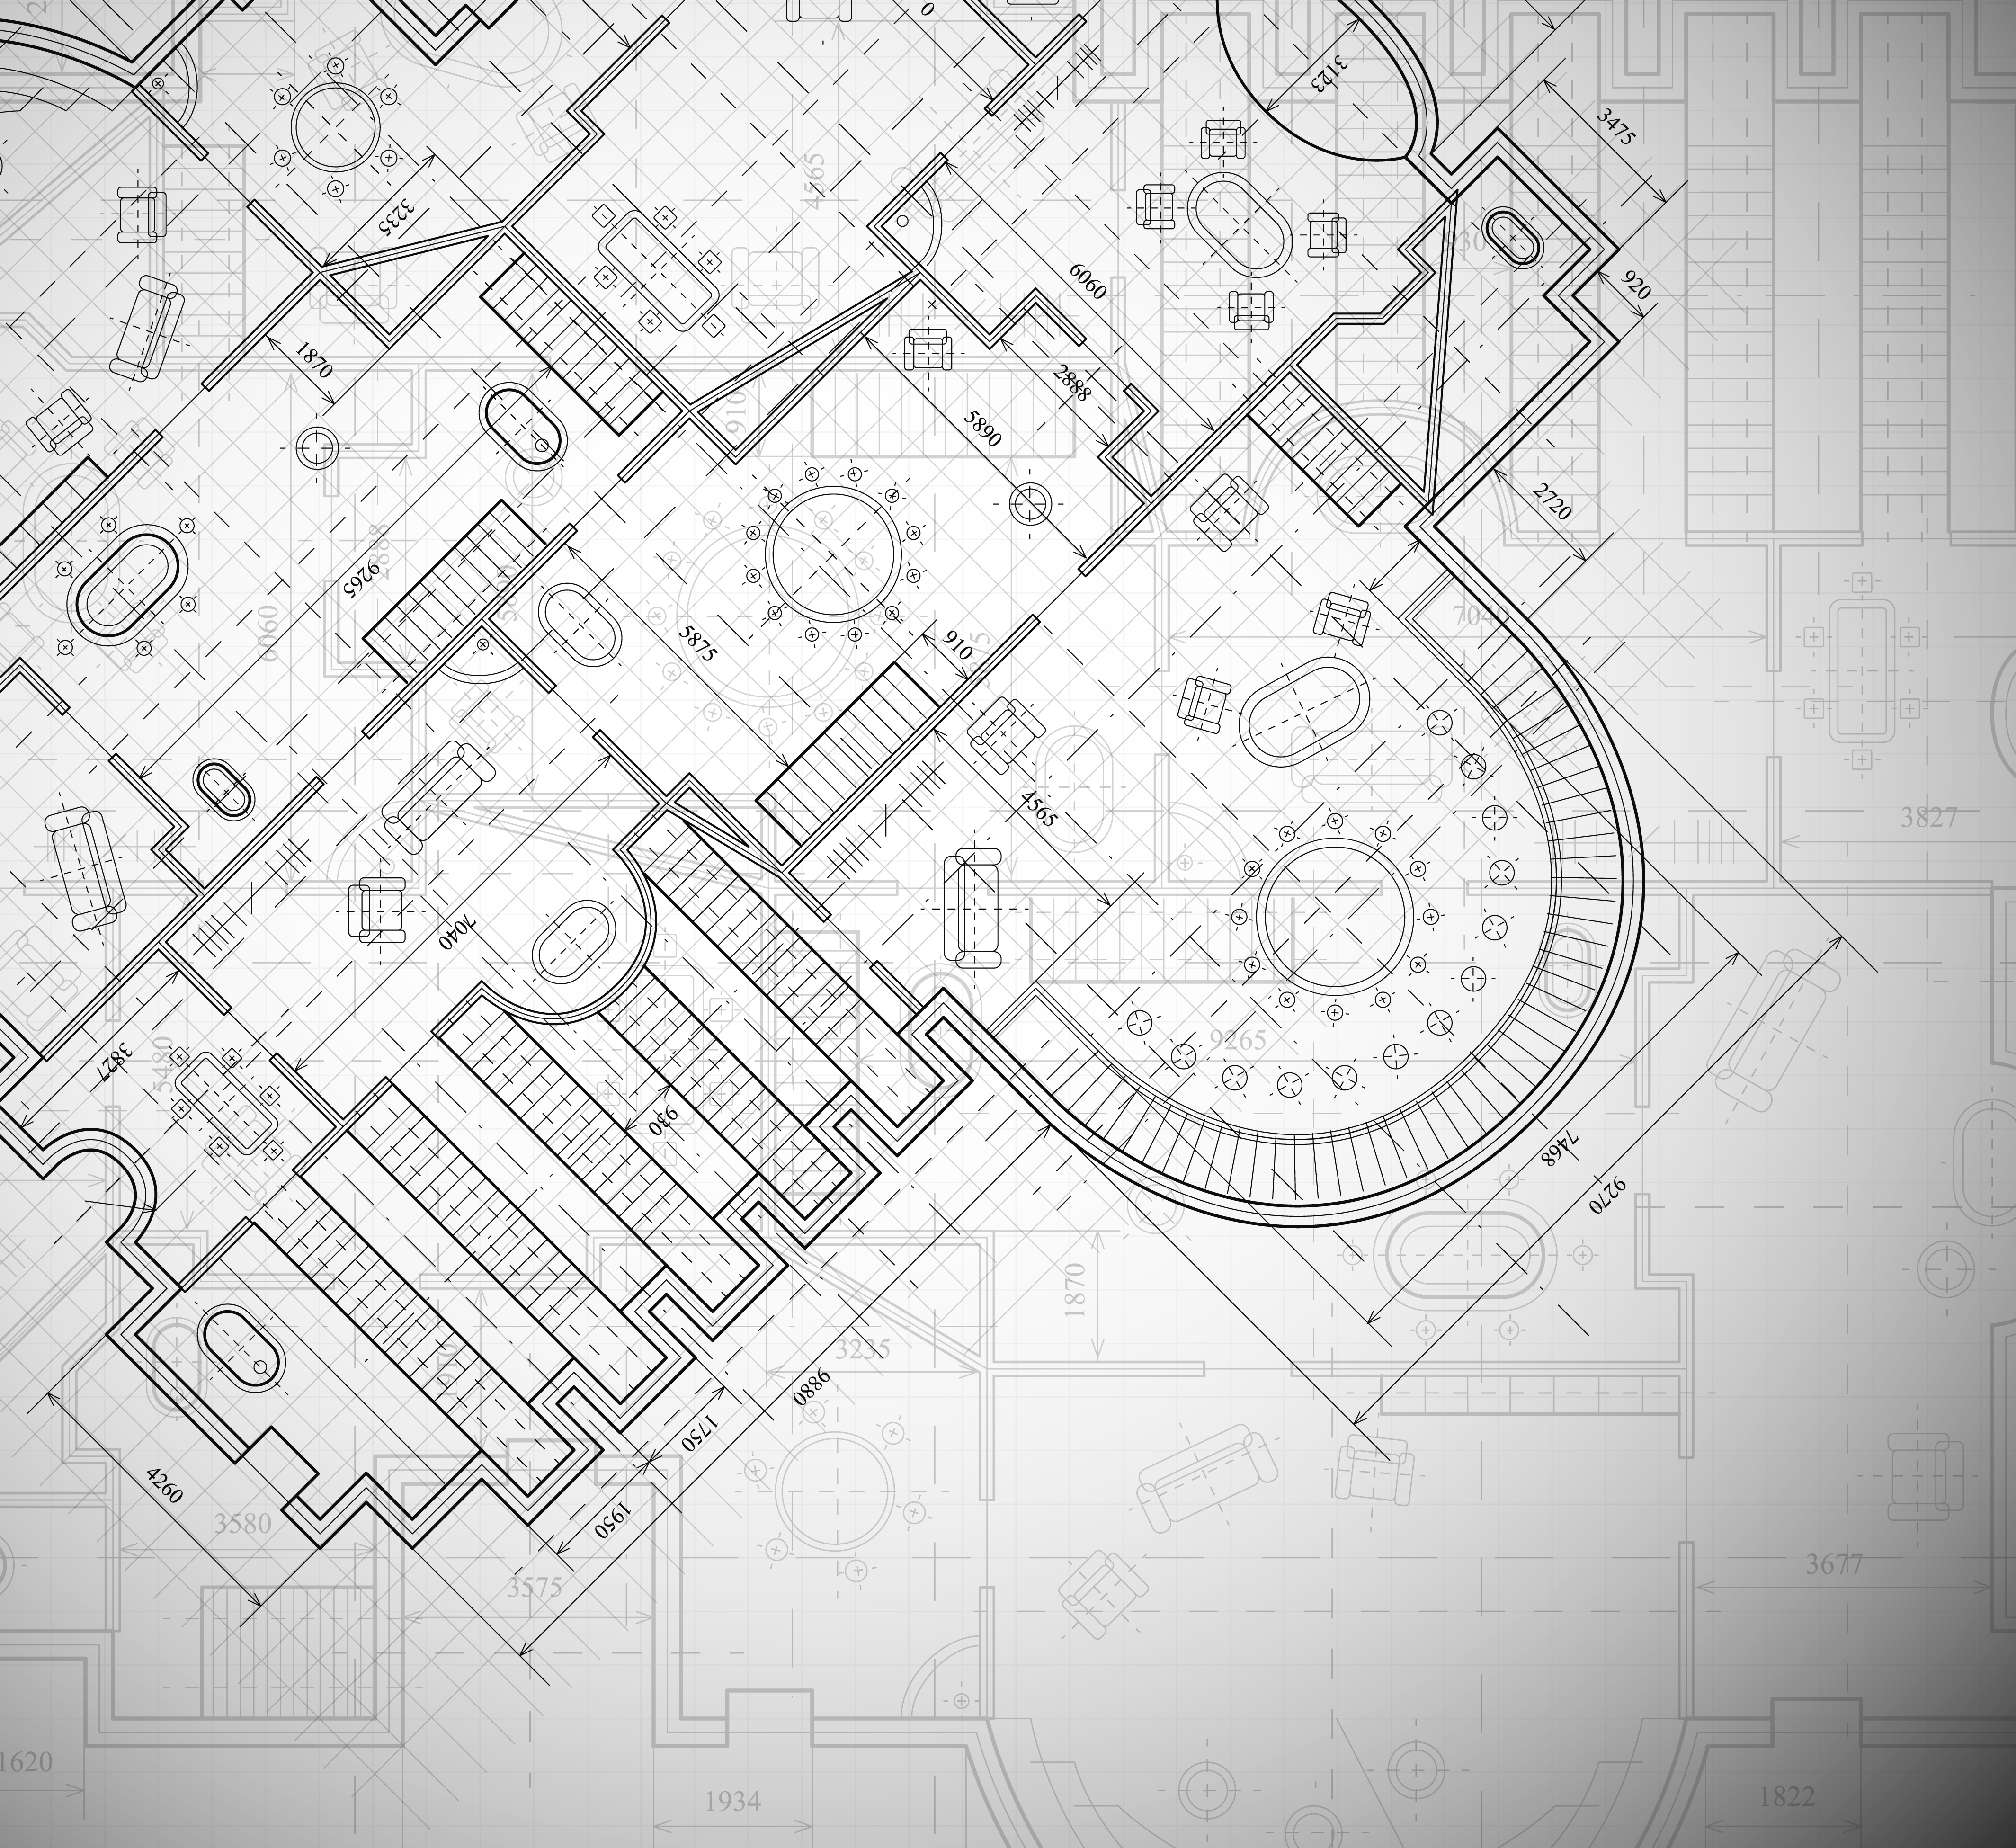 Shutterstock image of architectural plan.